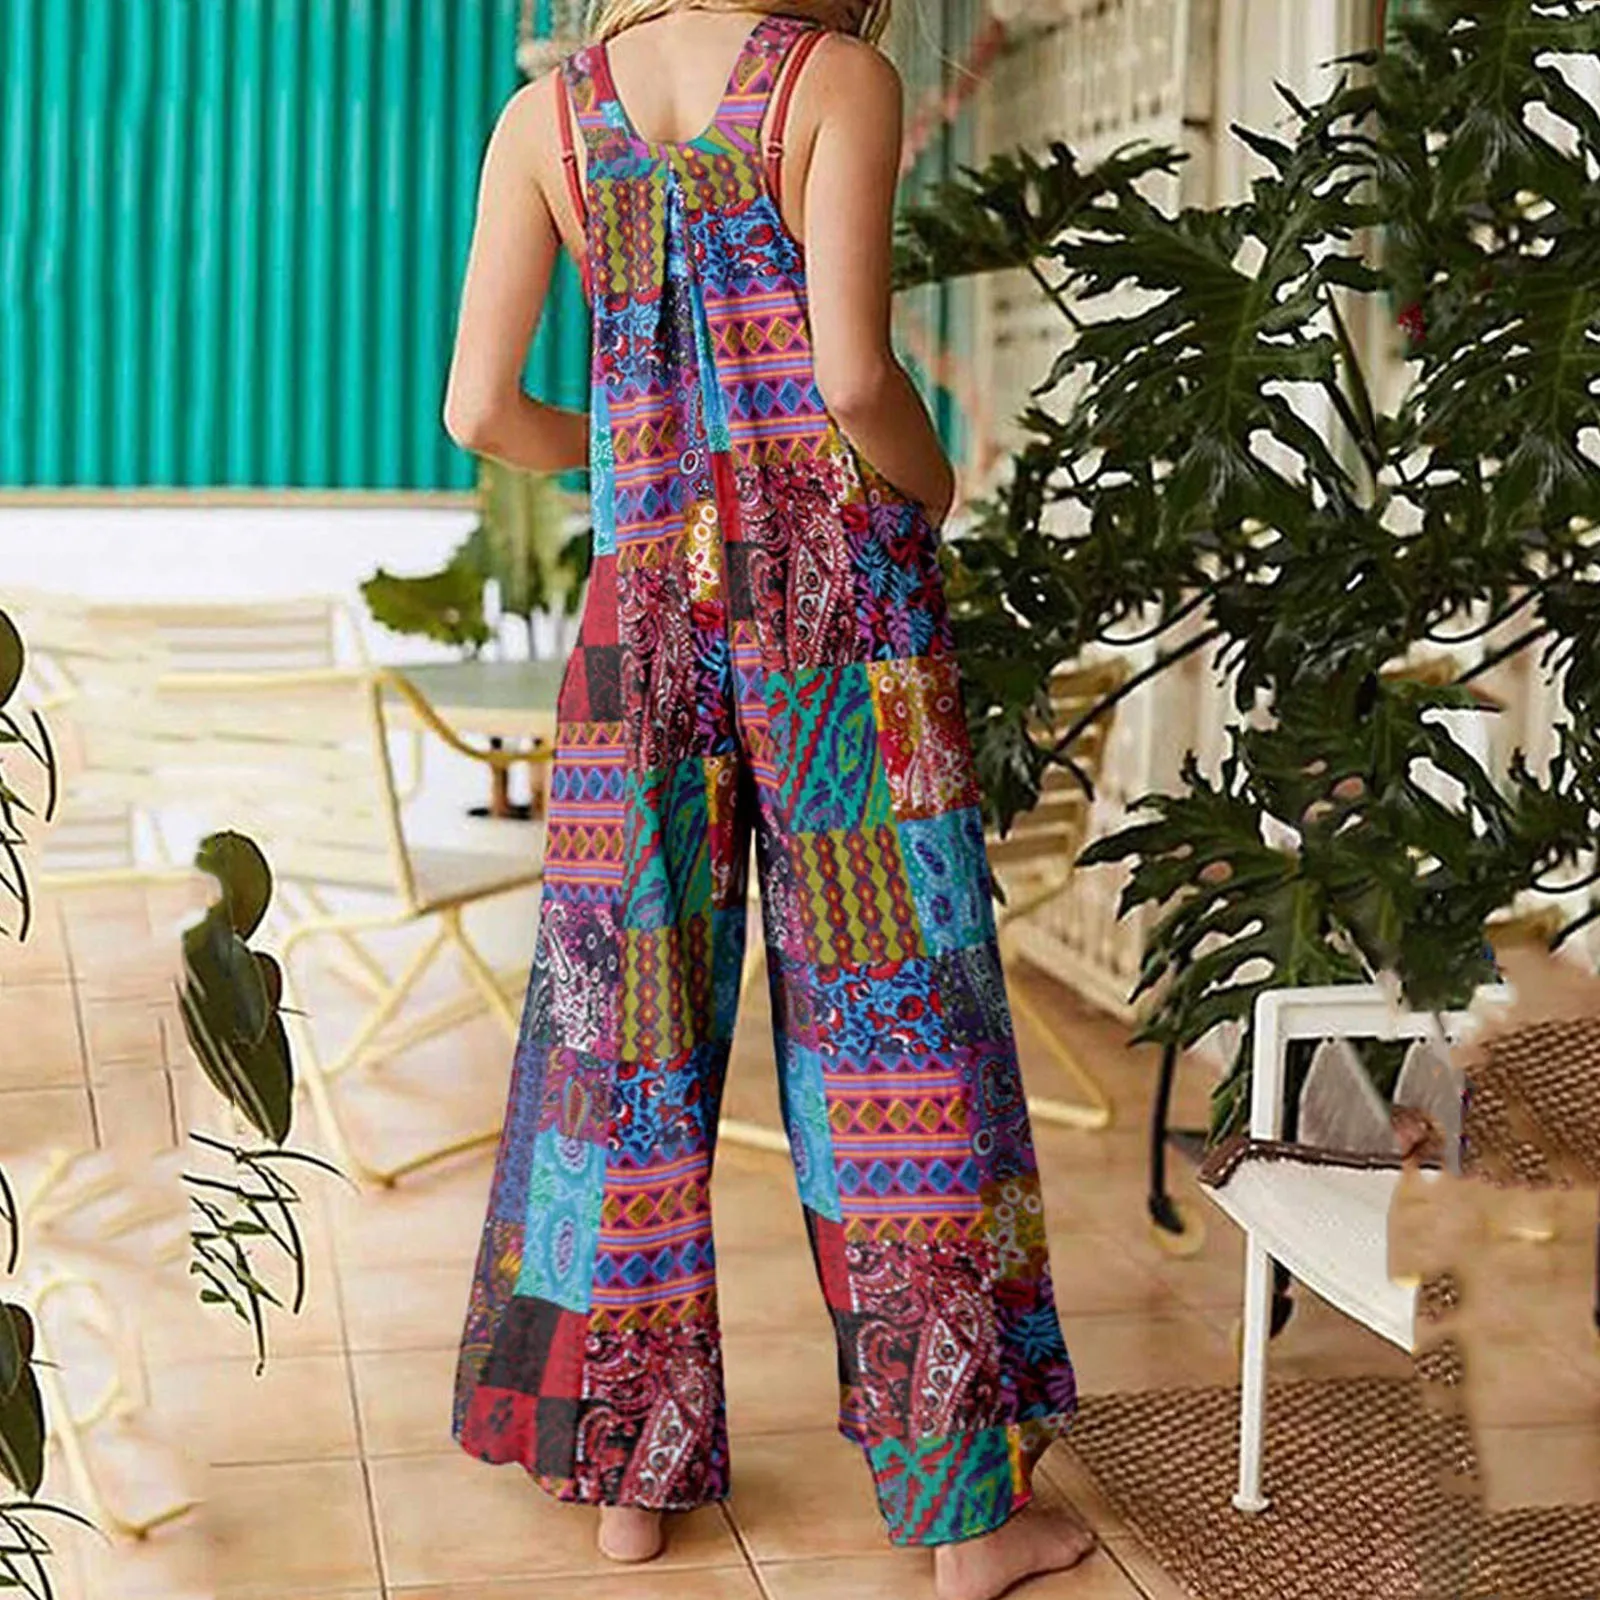 Women-Ethnic-Style-Jumpsuits-Summer-Overalls-Multicolor-Square-Neck-Sleeveless-Casual-Rompers-with-Pockets-for-Girls-5